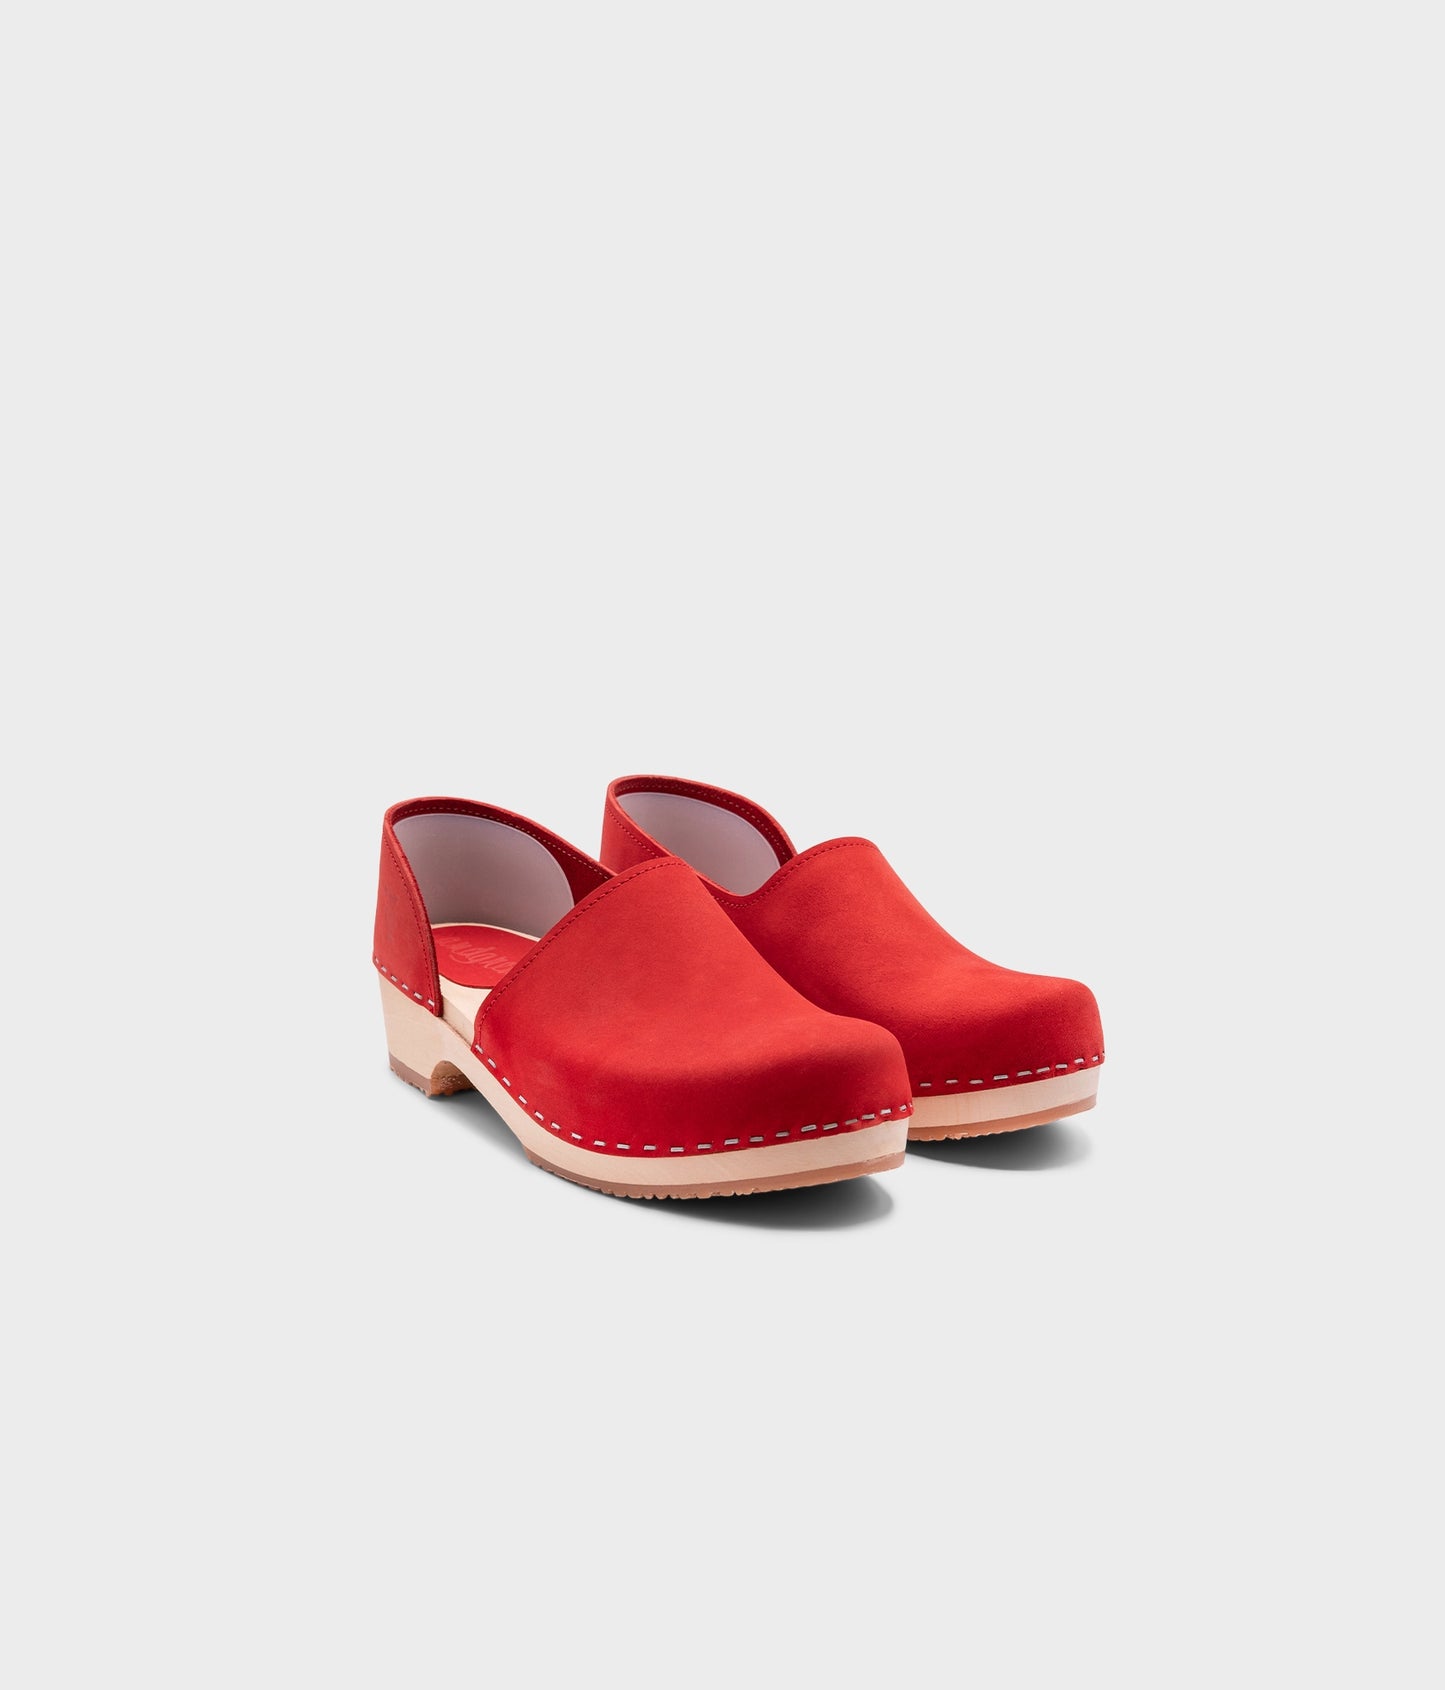 low heeled closed-back clogs in red nubuck leather stapled on a light wooden base